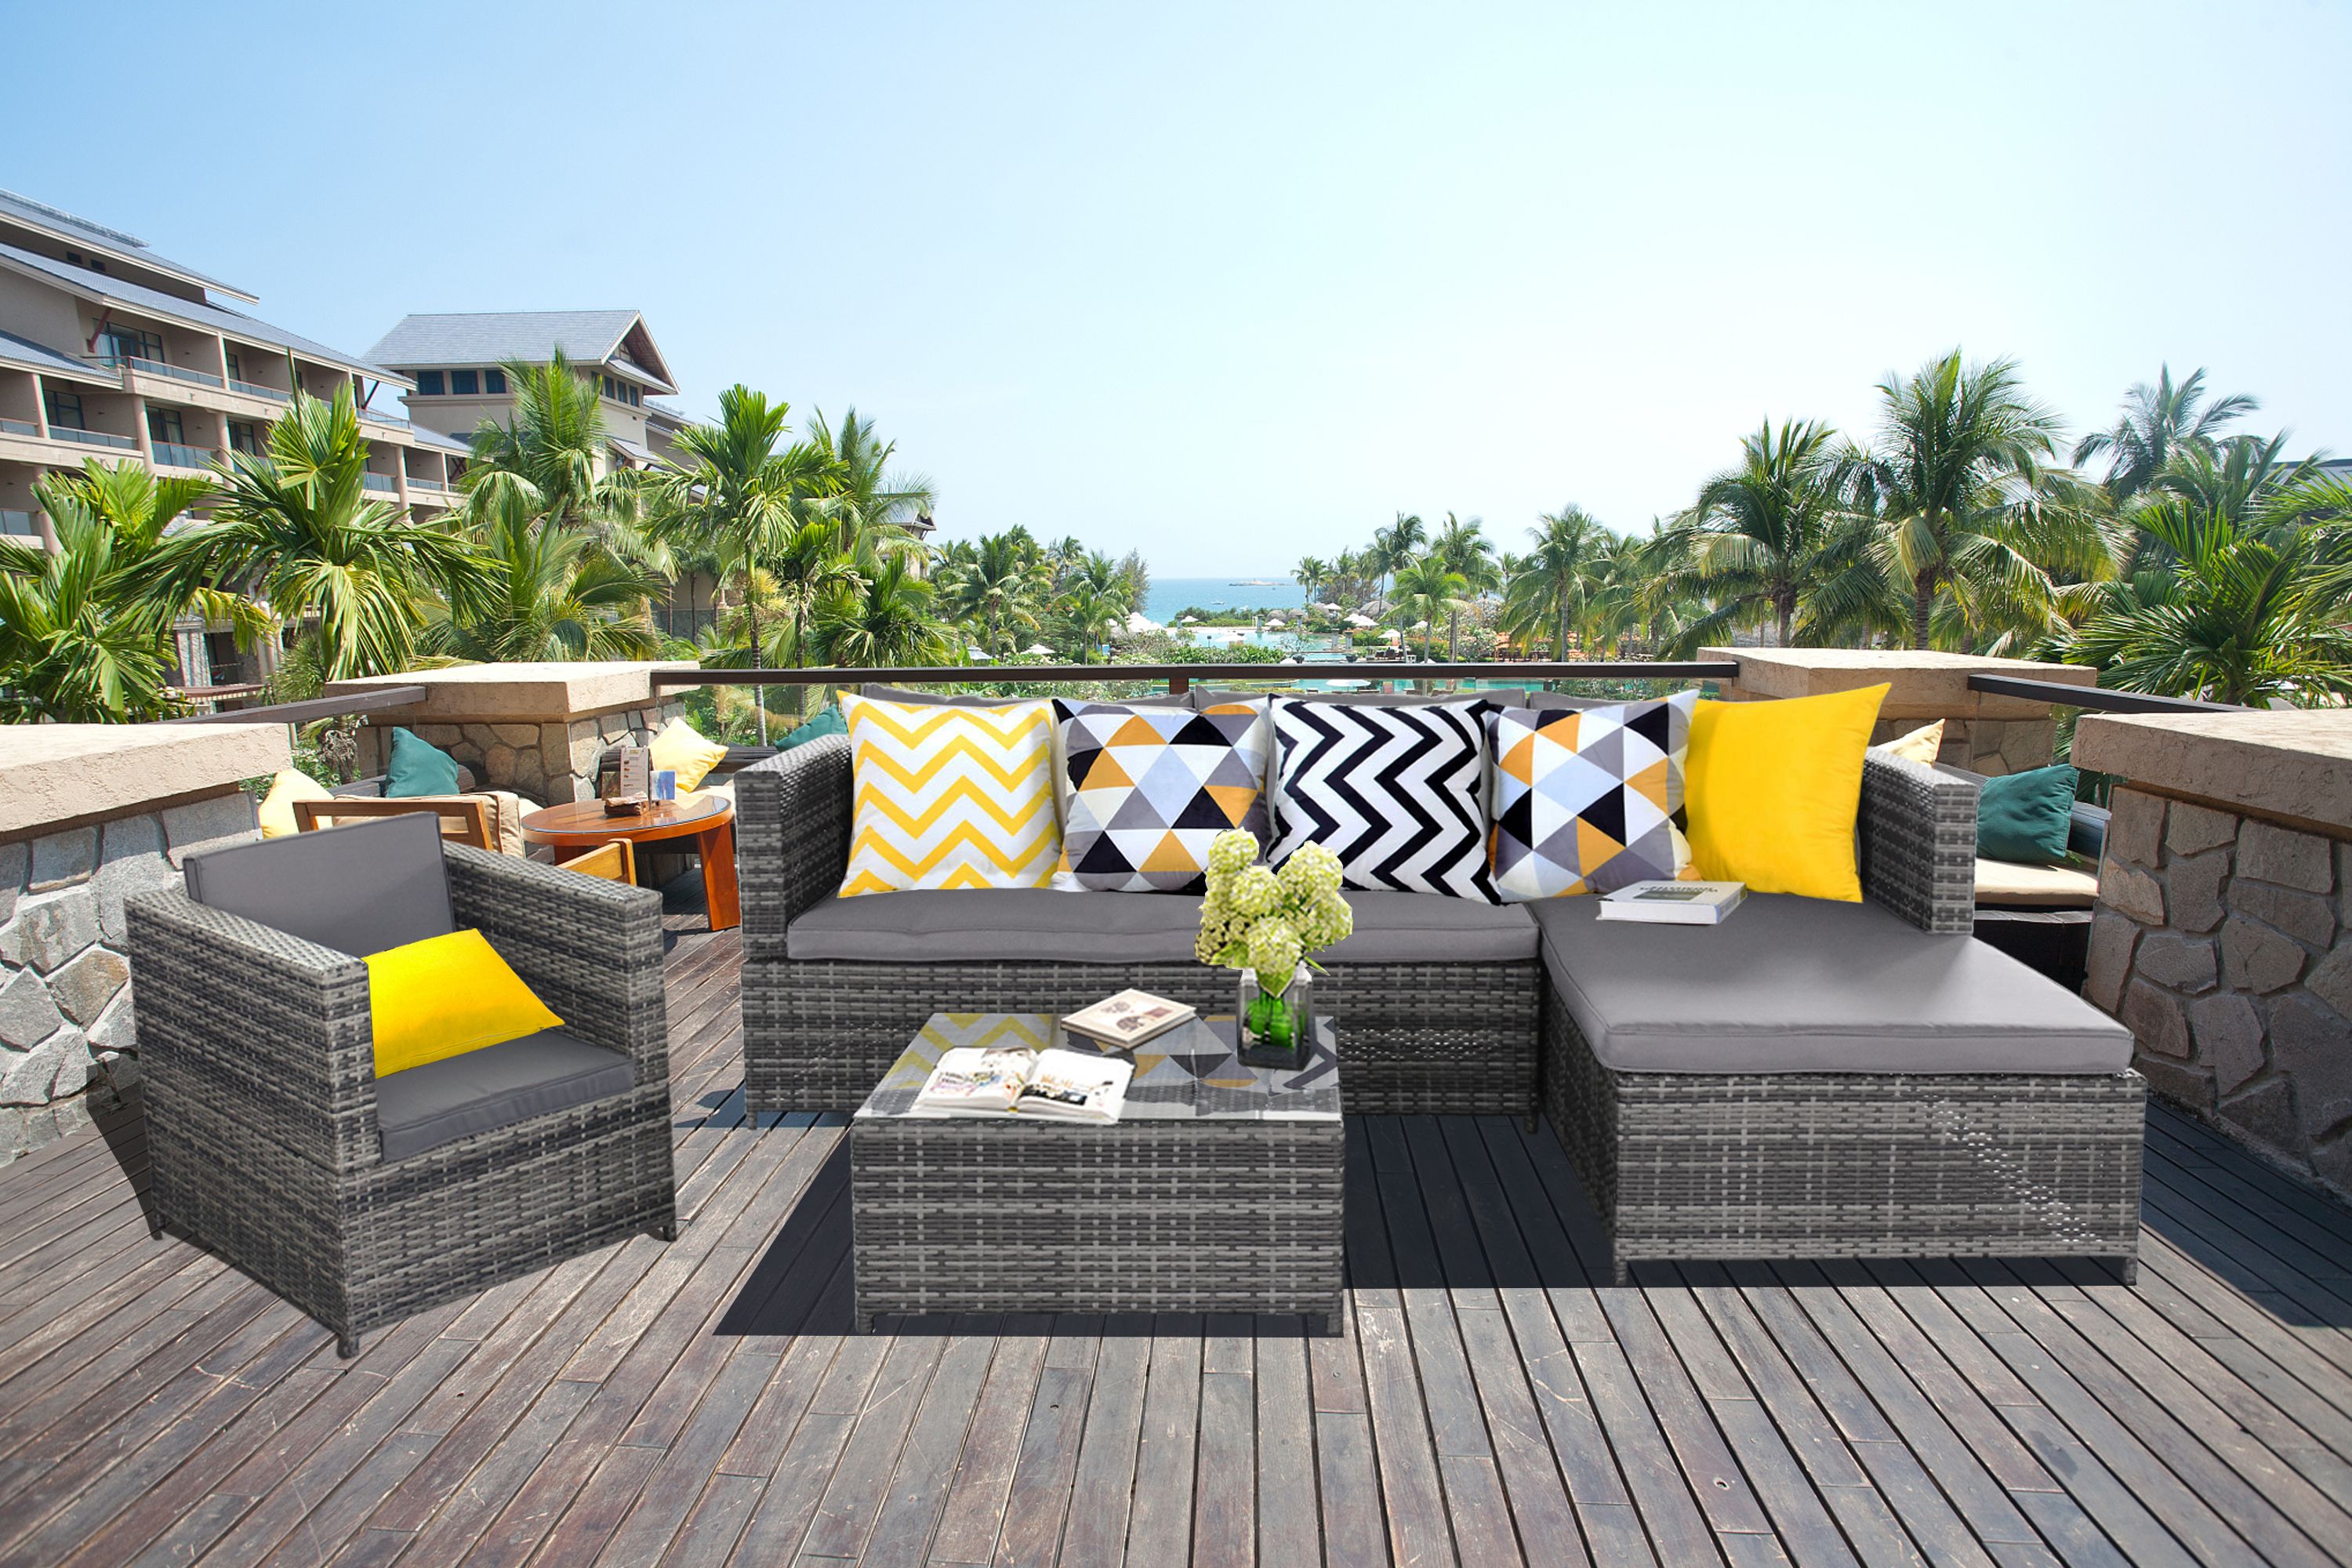 Baner Garden SJ-14067 Complete 4 Piece PE Wicker Rattan Pool Patio Garden Chaise Lounge Set with Cushions, Grey - image 1 of 7